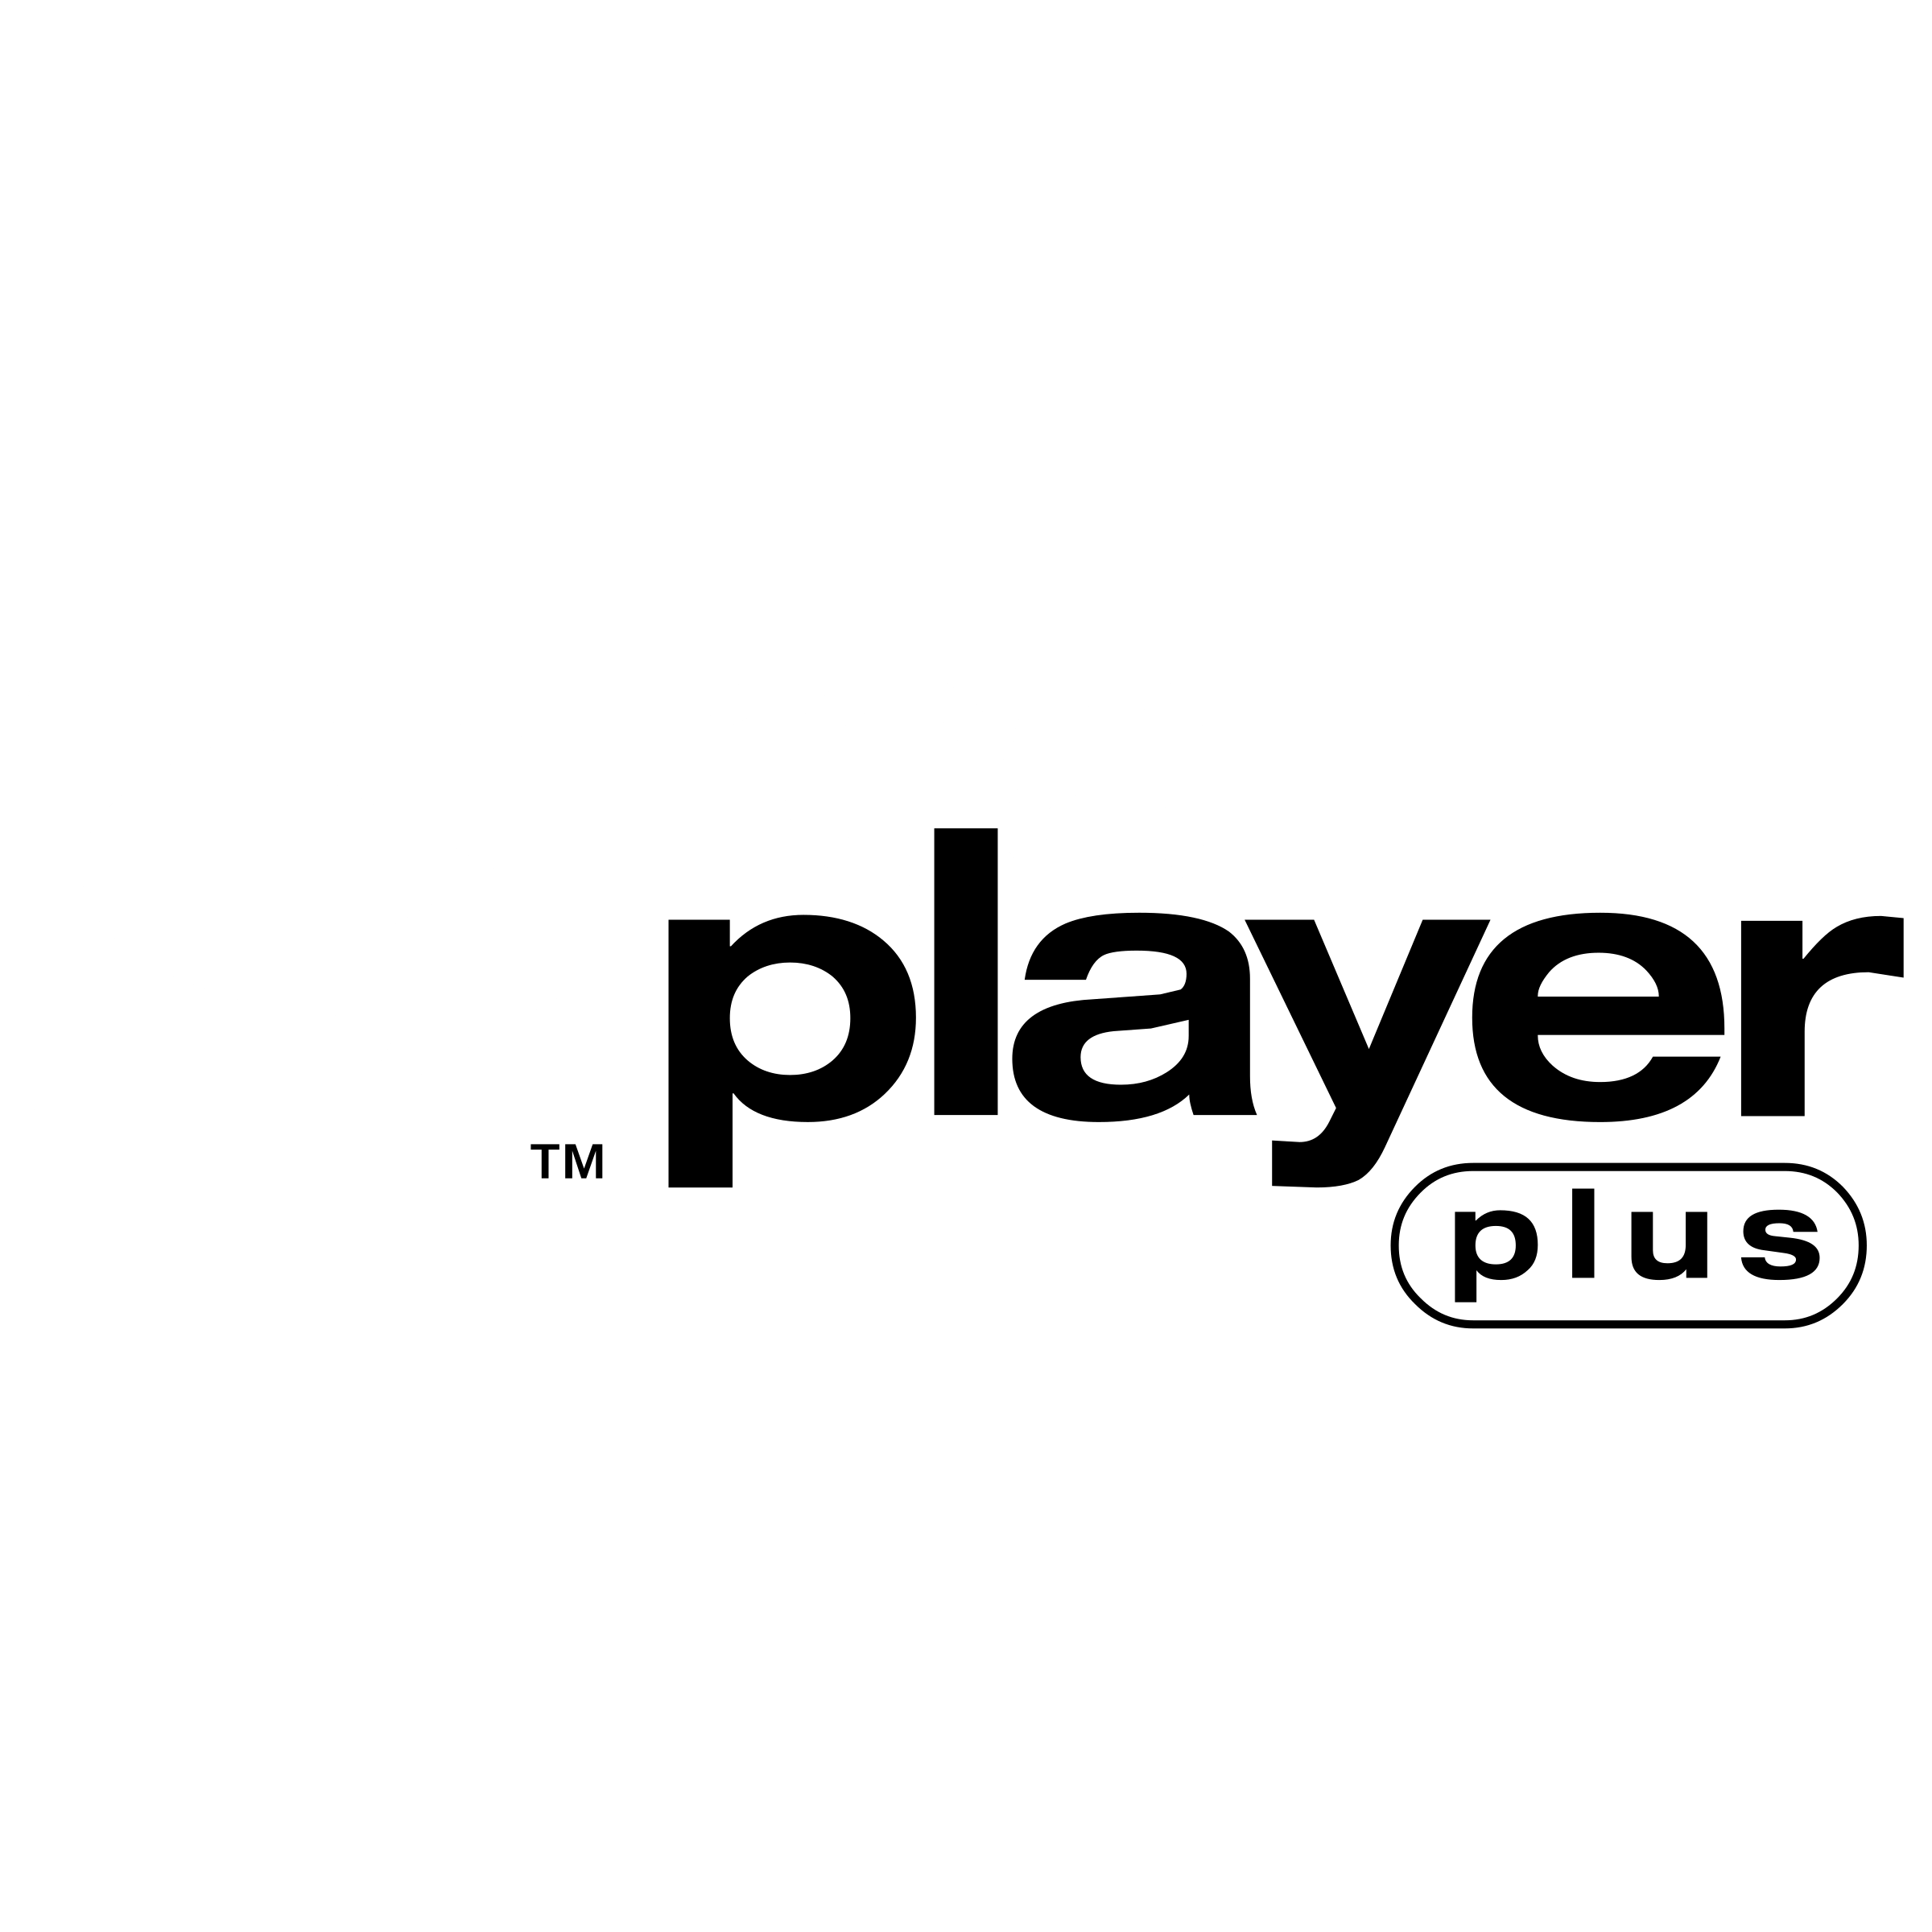 real player logo png